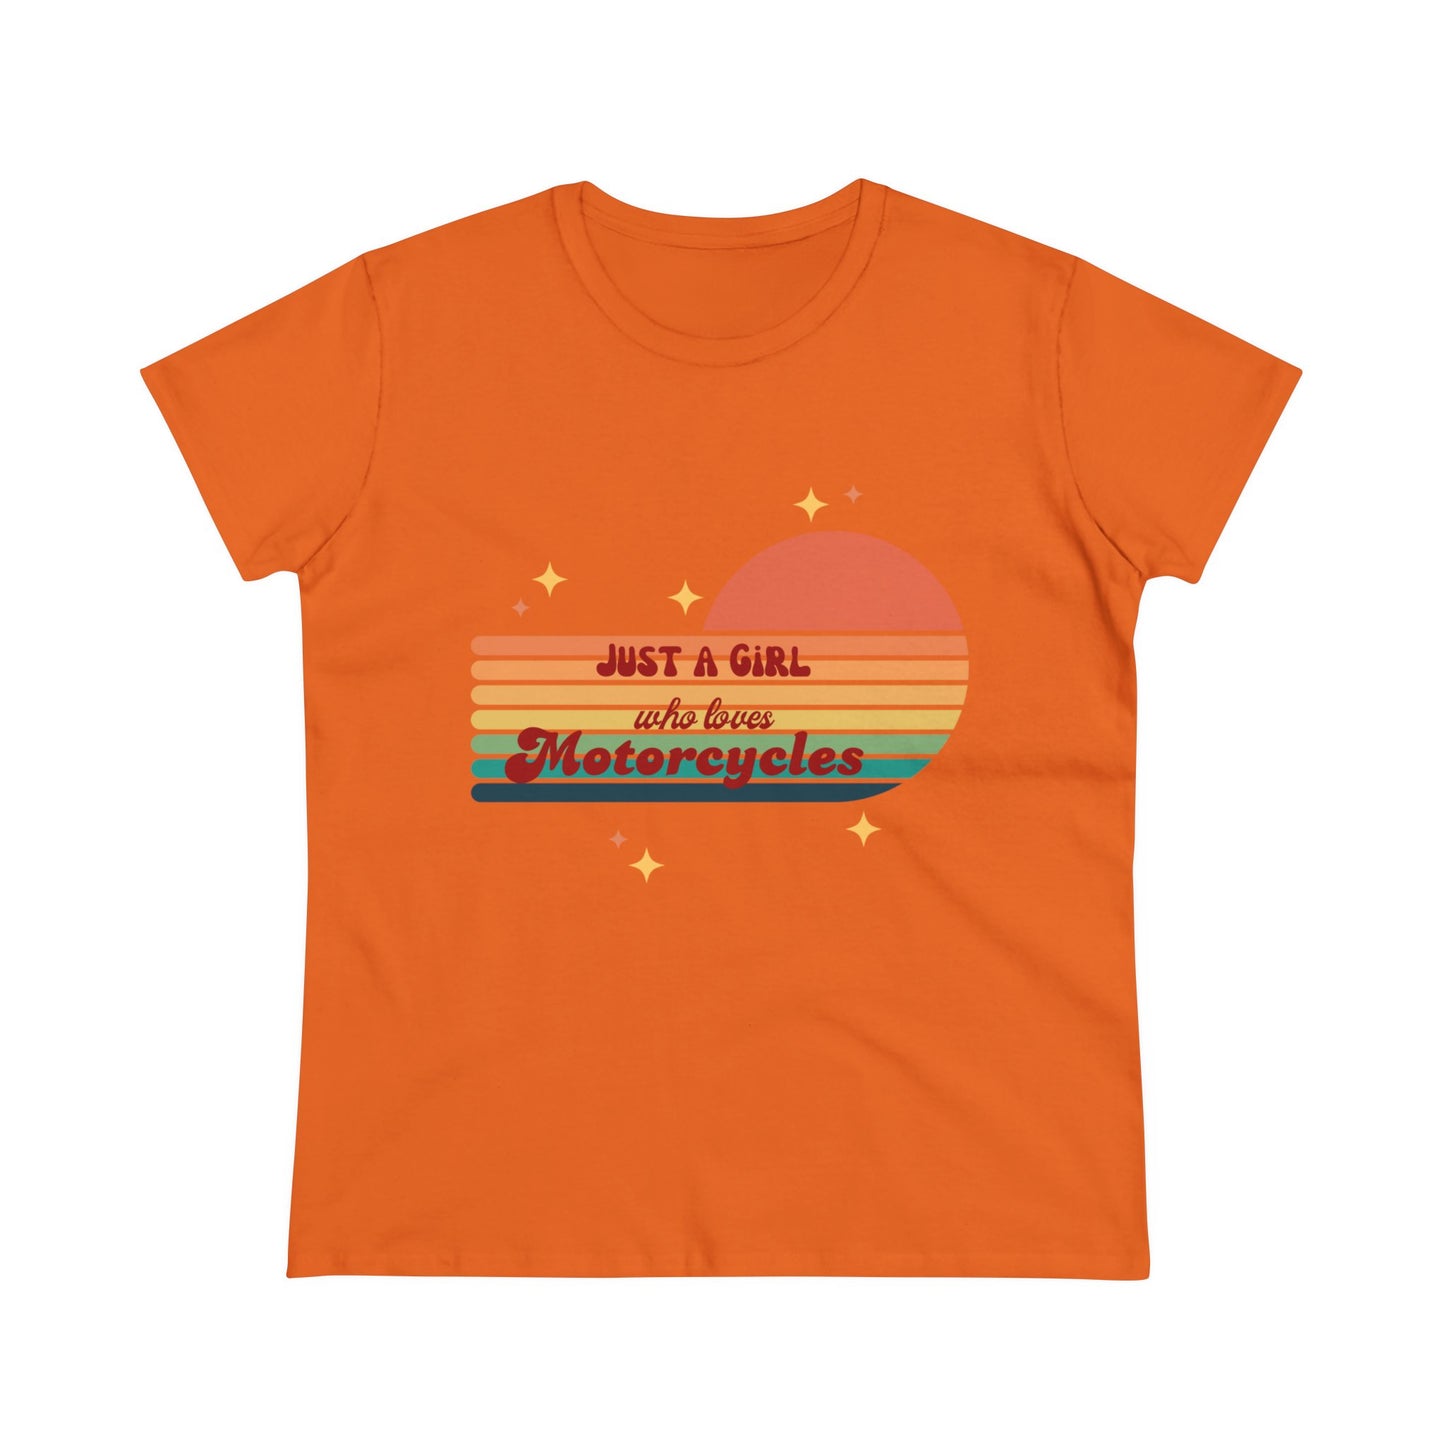 Just a Girl Tee for Women